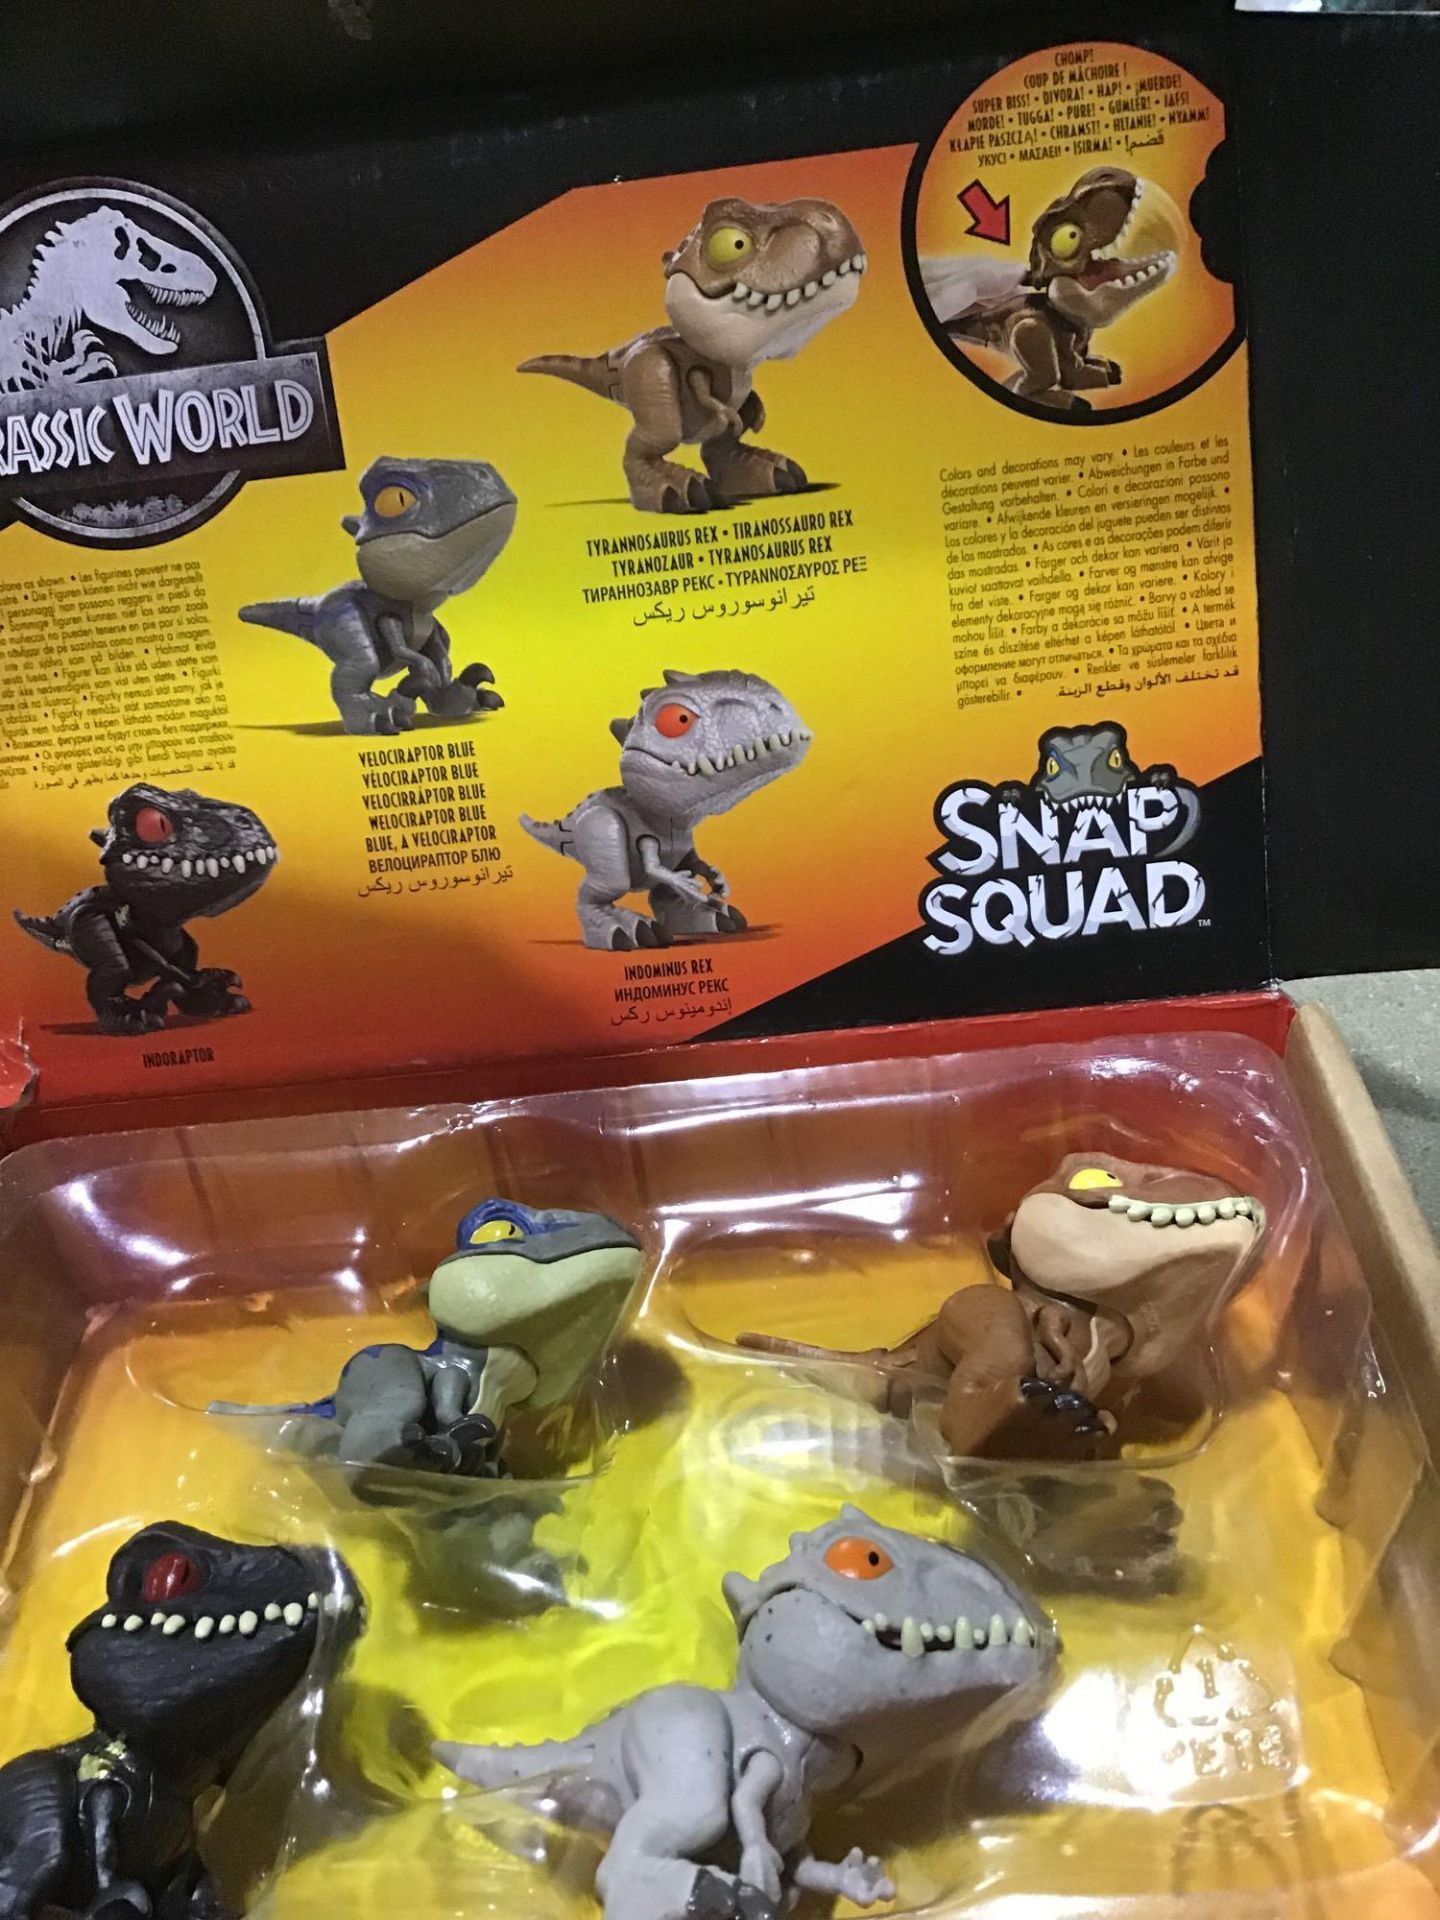 Jurassic World Dinosaur Snap Squad Collectibles for Display, Play and Snap On Feature - Image 3 of 4